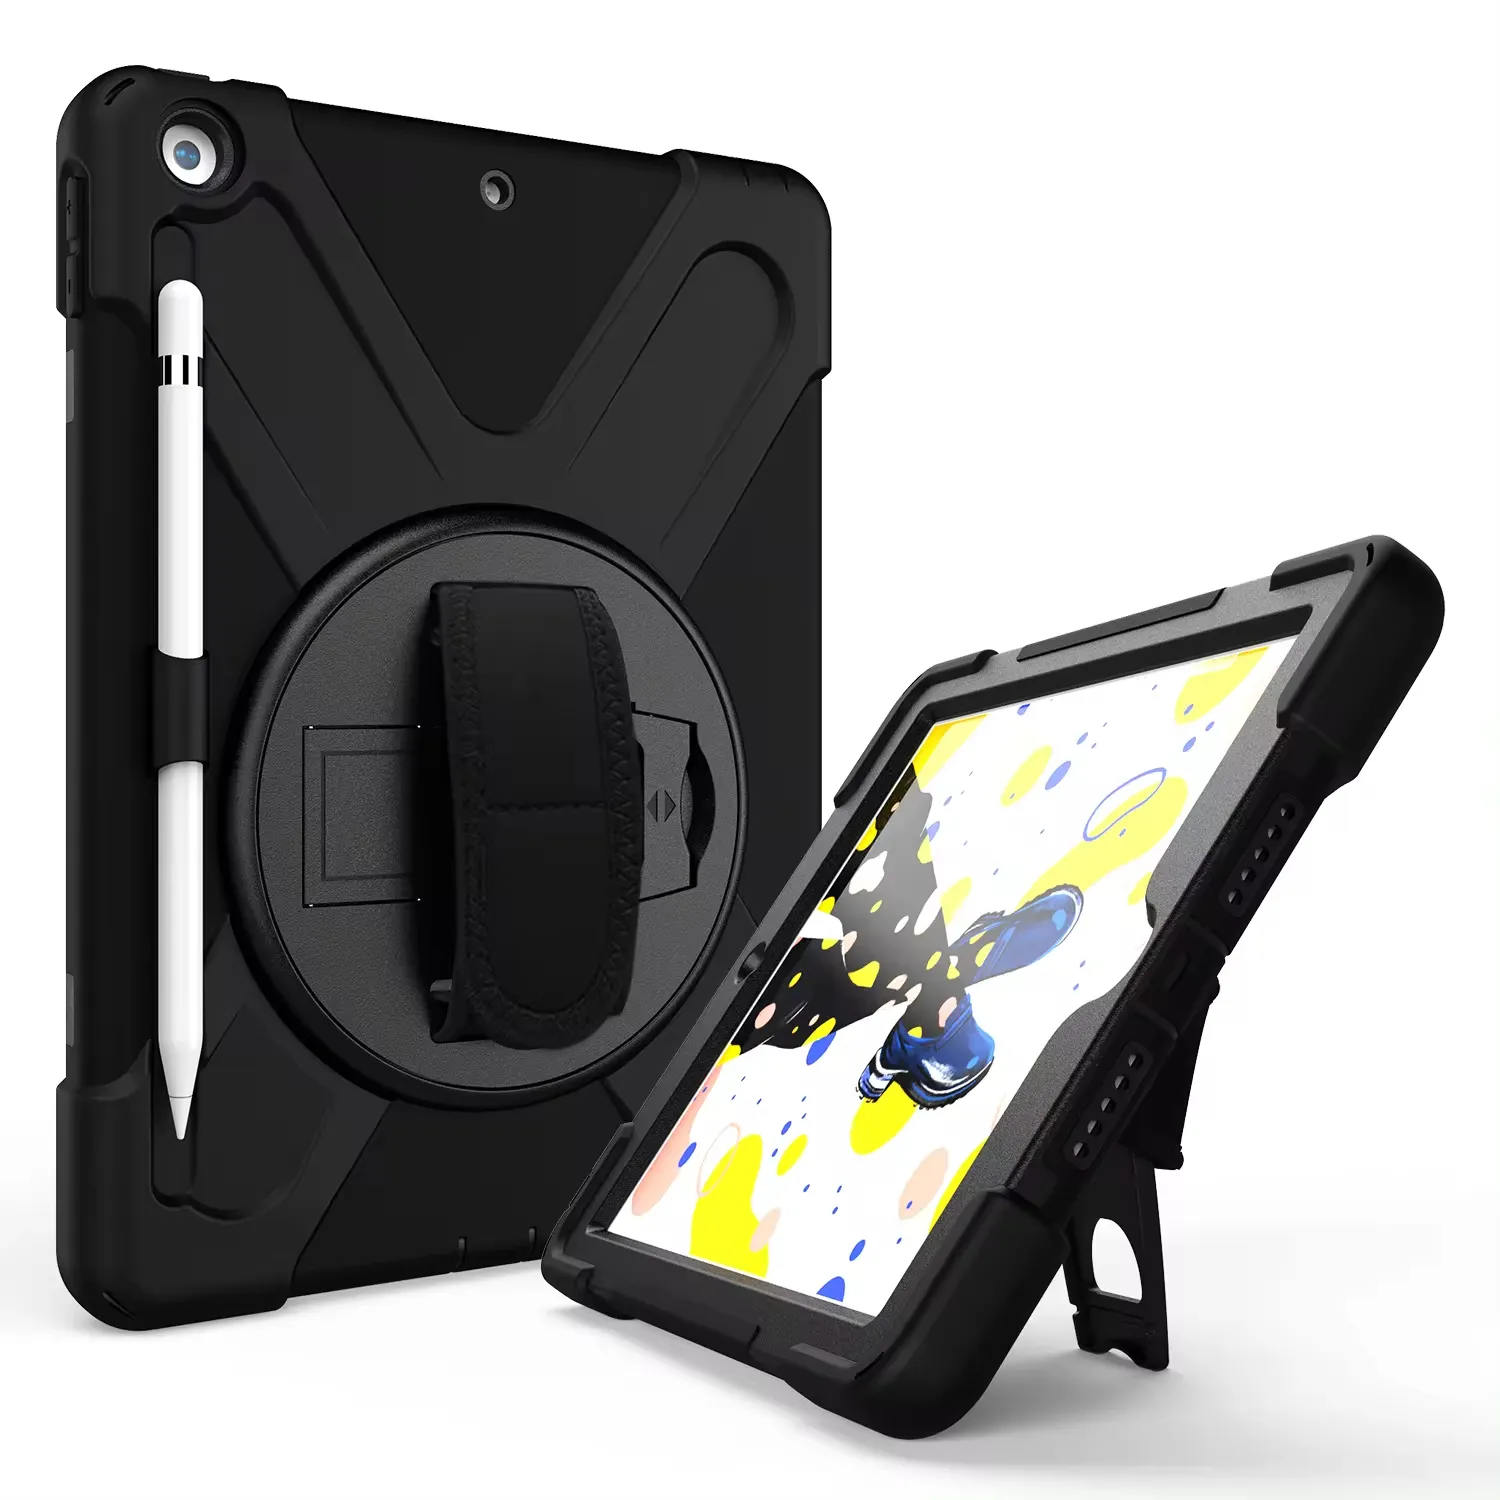 Rugged Silicone Kids 10 Inch Tablet Case For Ipad Air2 With Hand Grip Strap + Shoulder Strap Bundled